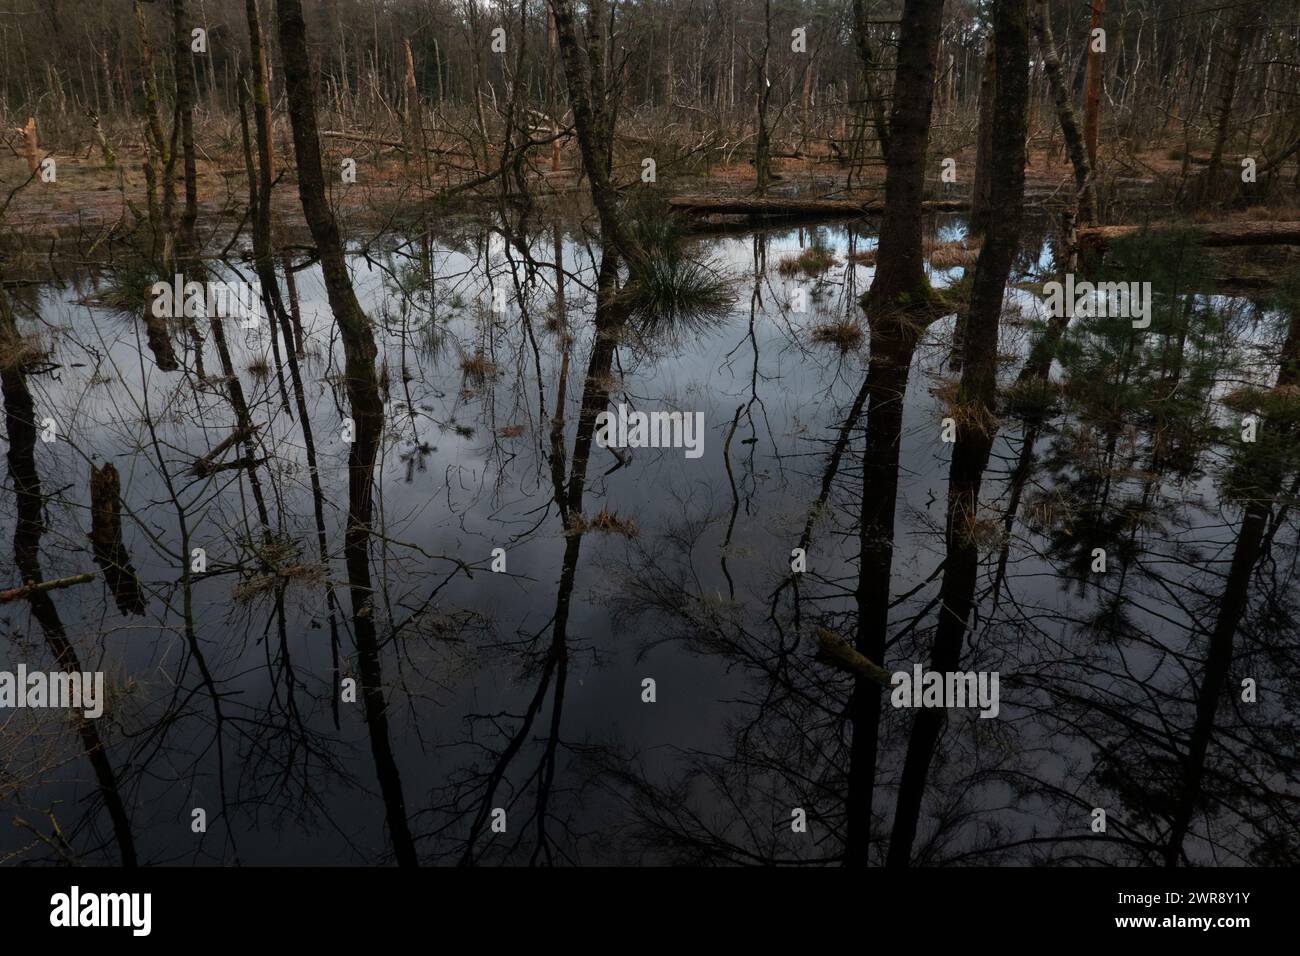 Drowning forest: dead Birches and some pines reflected in dark, gloomy water Stock Photo